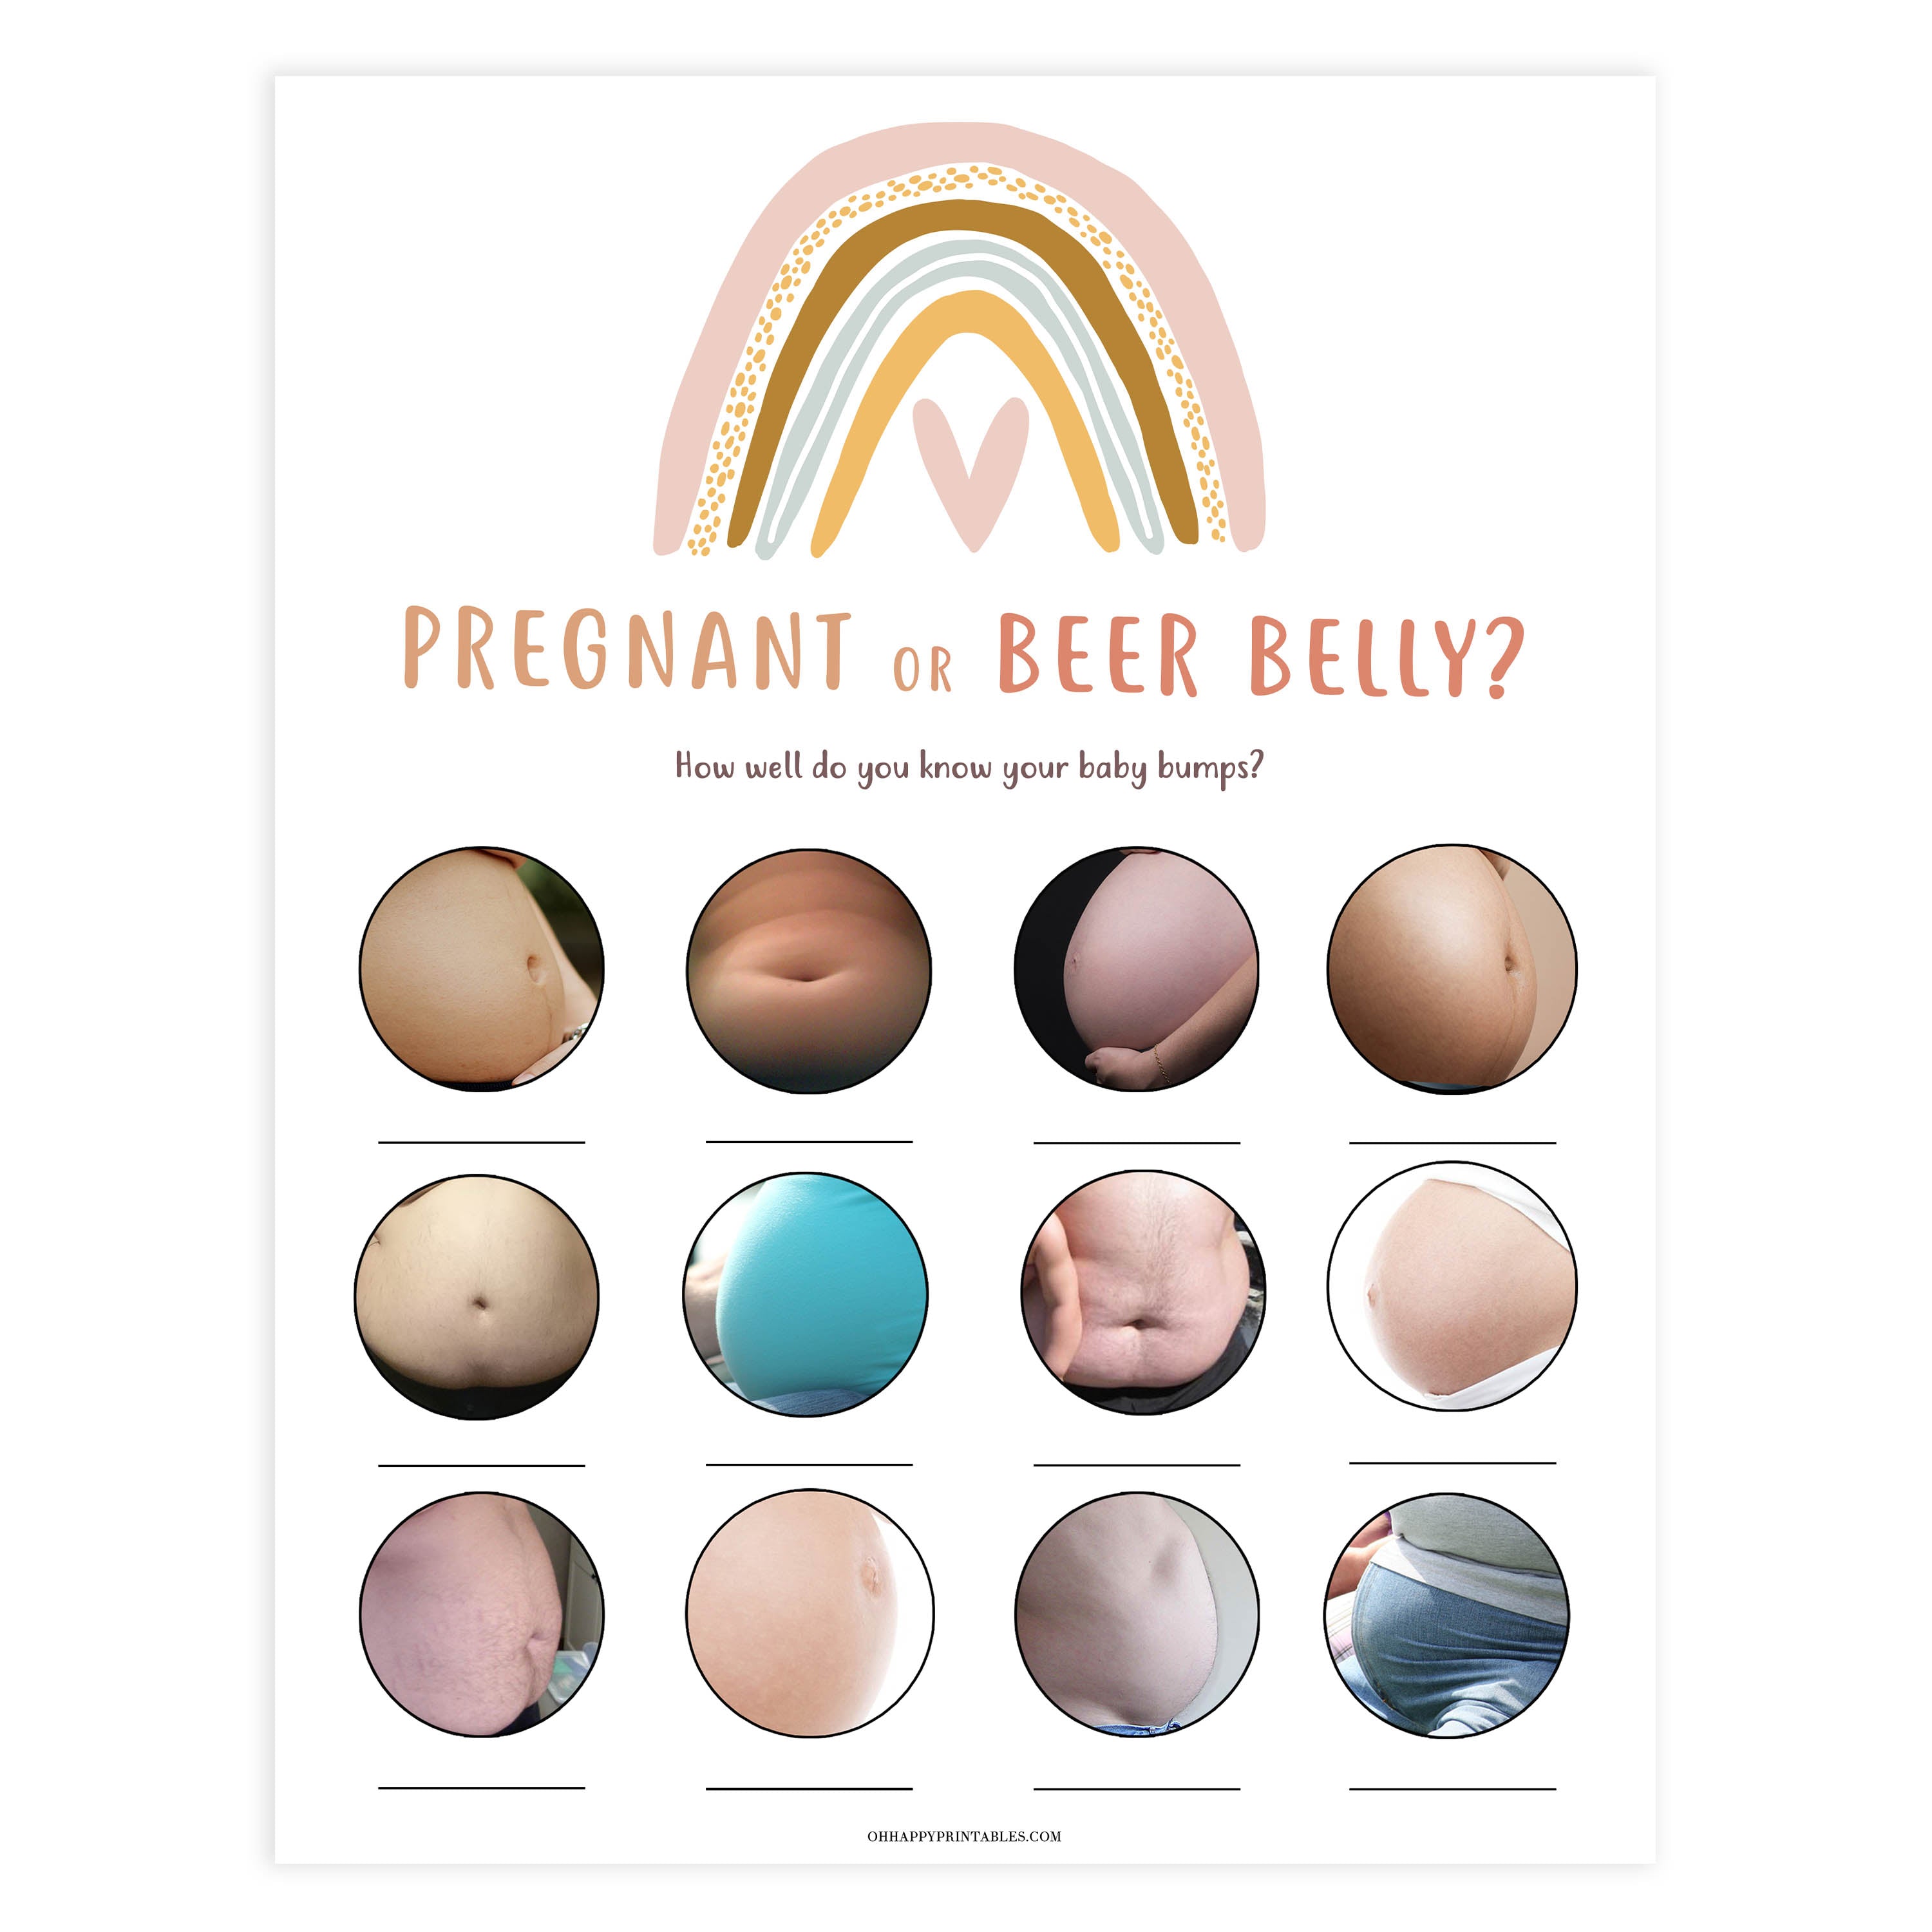 pregnant or beer belly game, Printable baby shower games, boho rainbow baby games, baby shower games, fun baby shower ideas, top baby shower ideas, boho rainbow baby shower, baby shower games, fun boho rainbow baby shower ideas